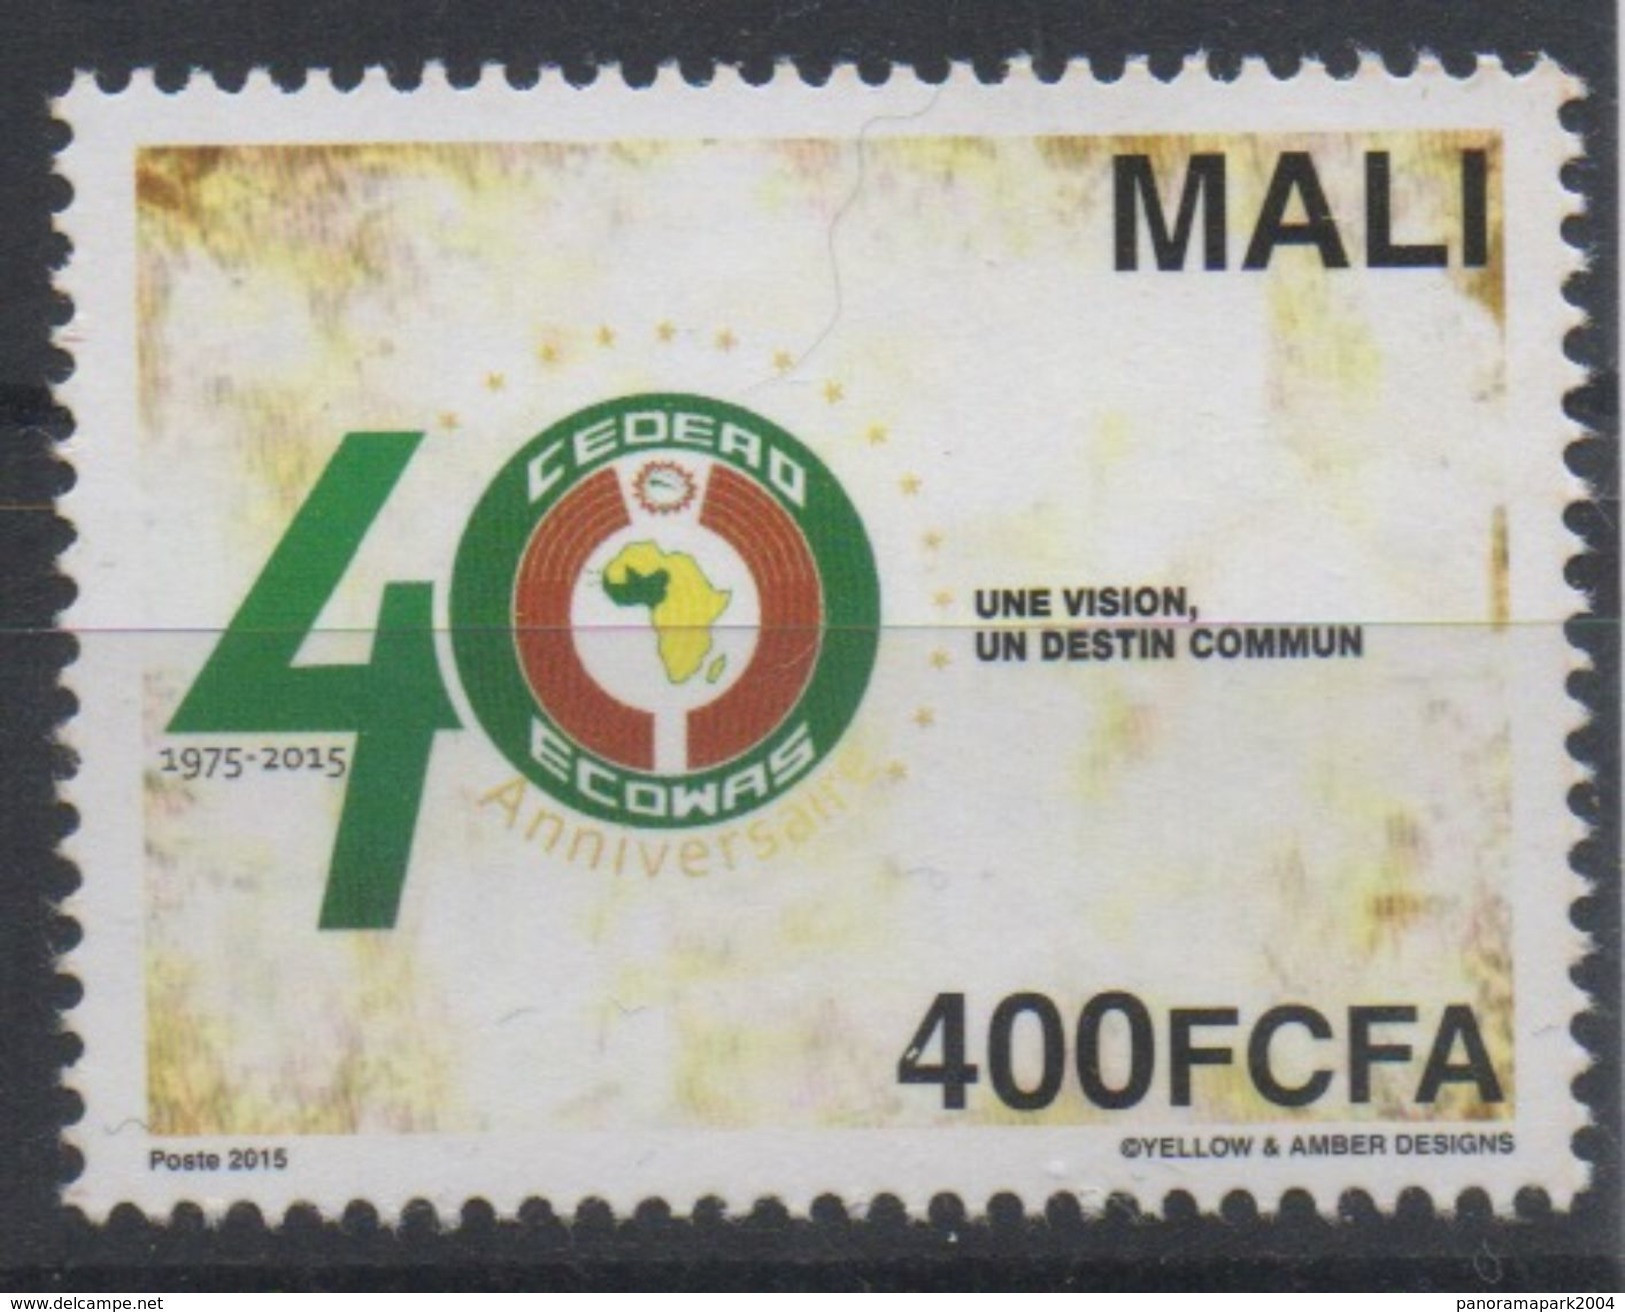 Mali 2015 Emission Commune Joint Issue CEDEAO ECOWAS 40 Ans 40 Years - Emissions Communes